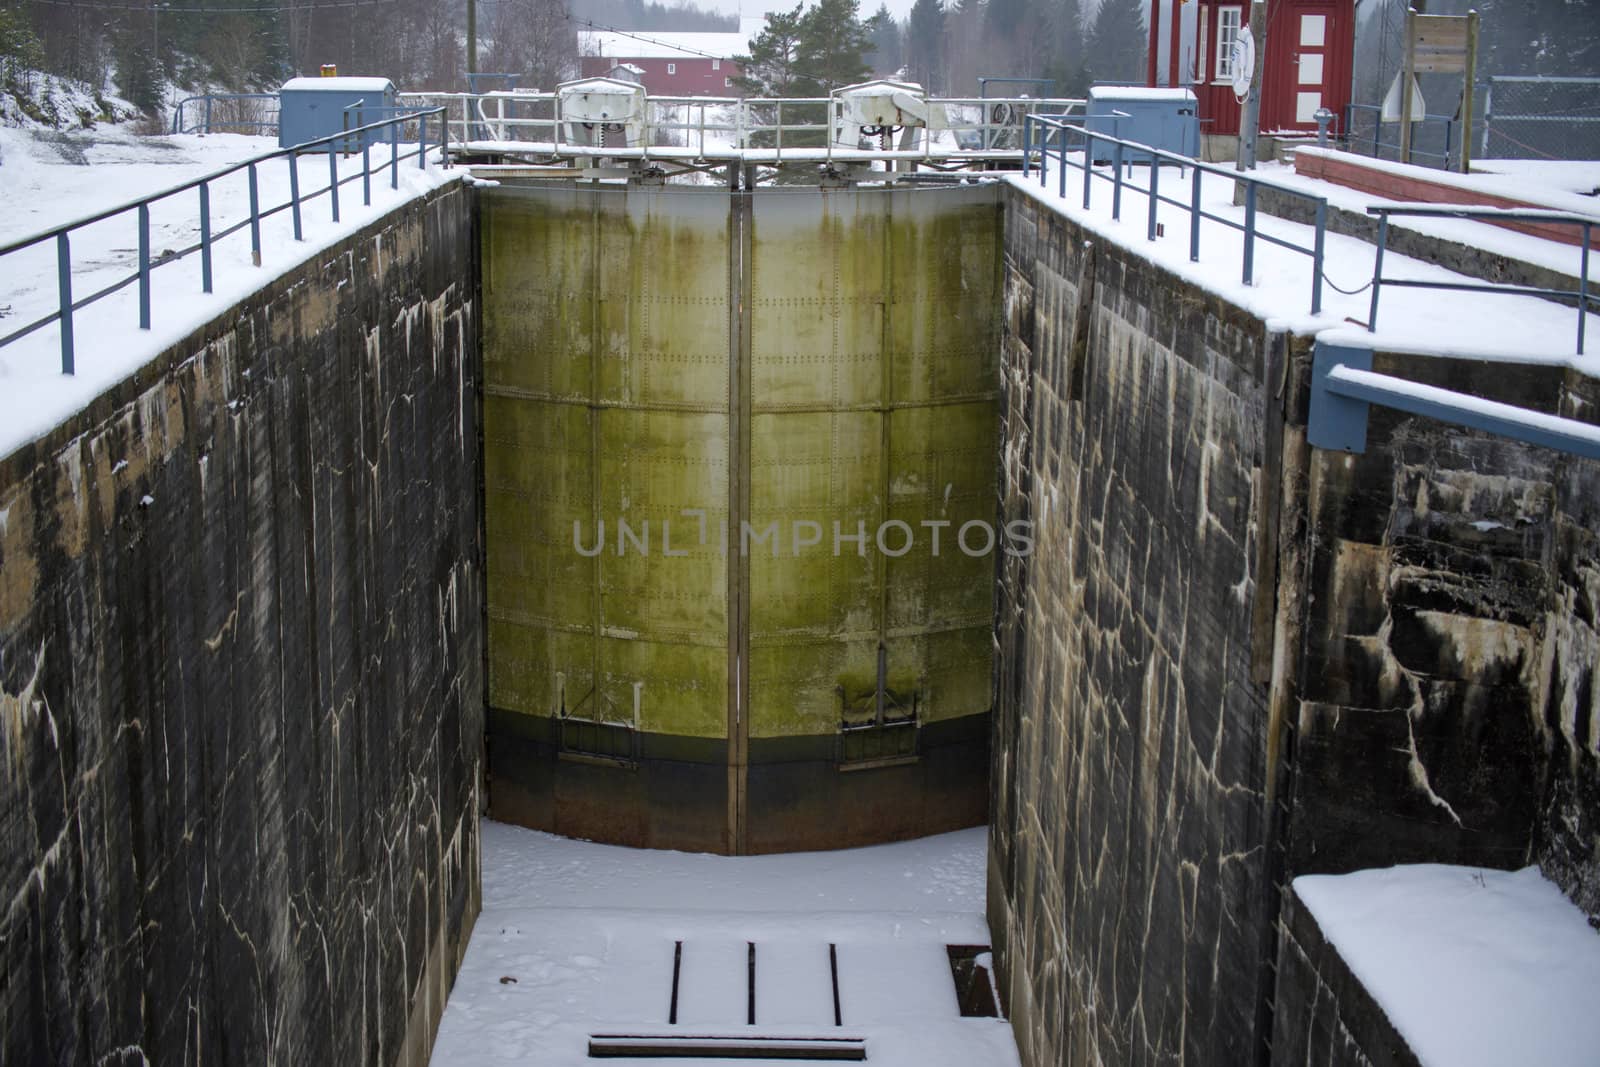 brekke sluices are a sluices-plant in Halden-canal, with its 26.6 m total height of four chambers is brekke northern europe's highest sluices, there is currently ongoing maintenance and repairs in the sluices-chambers